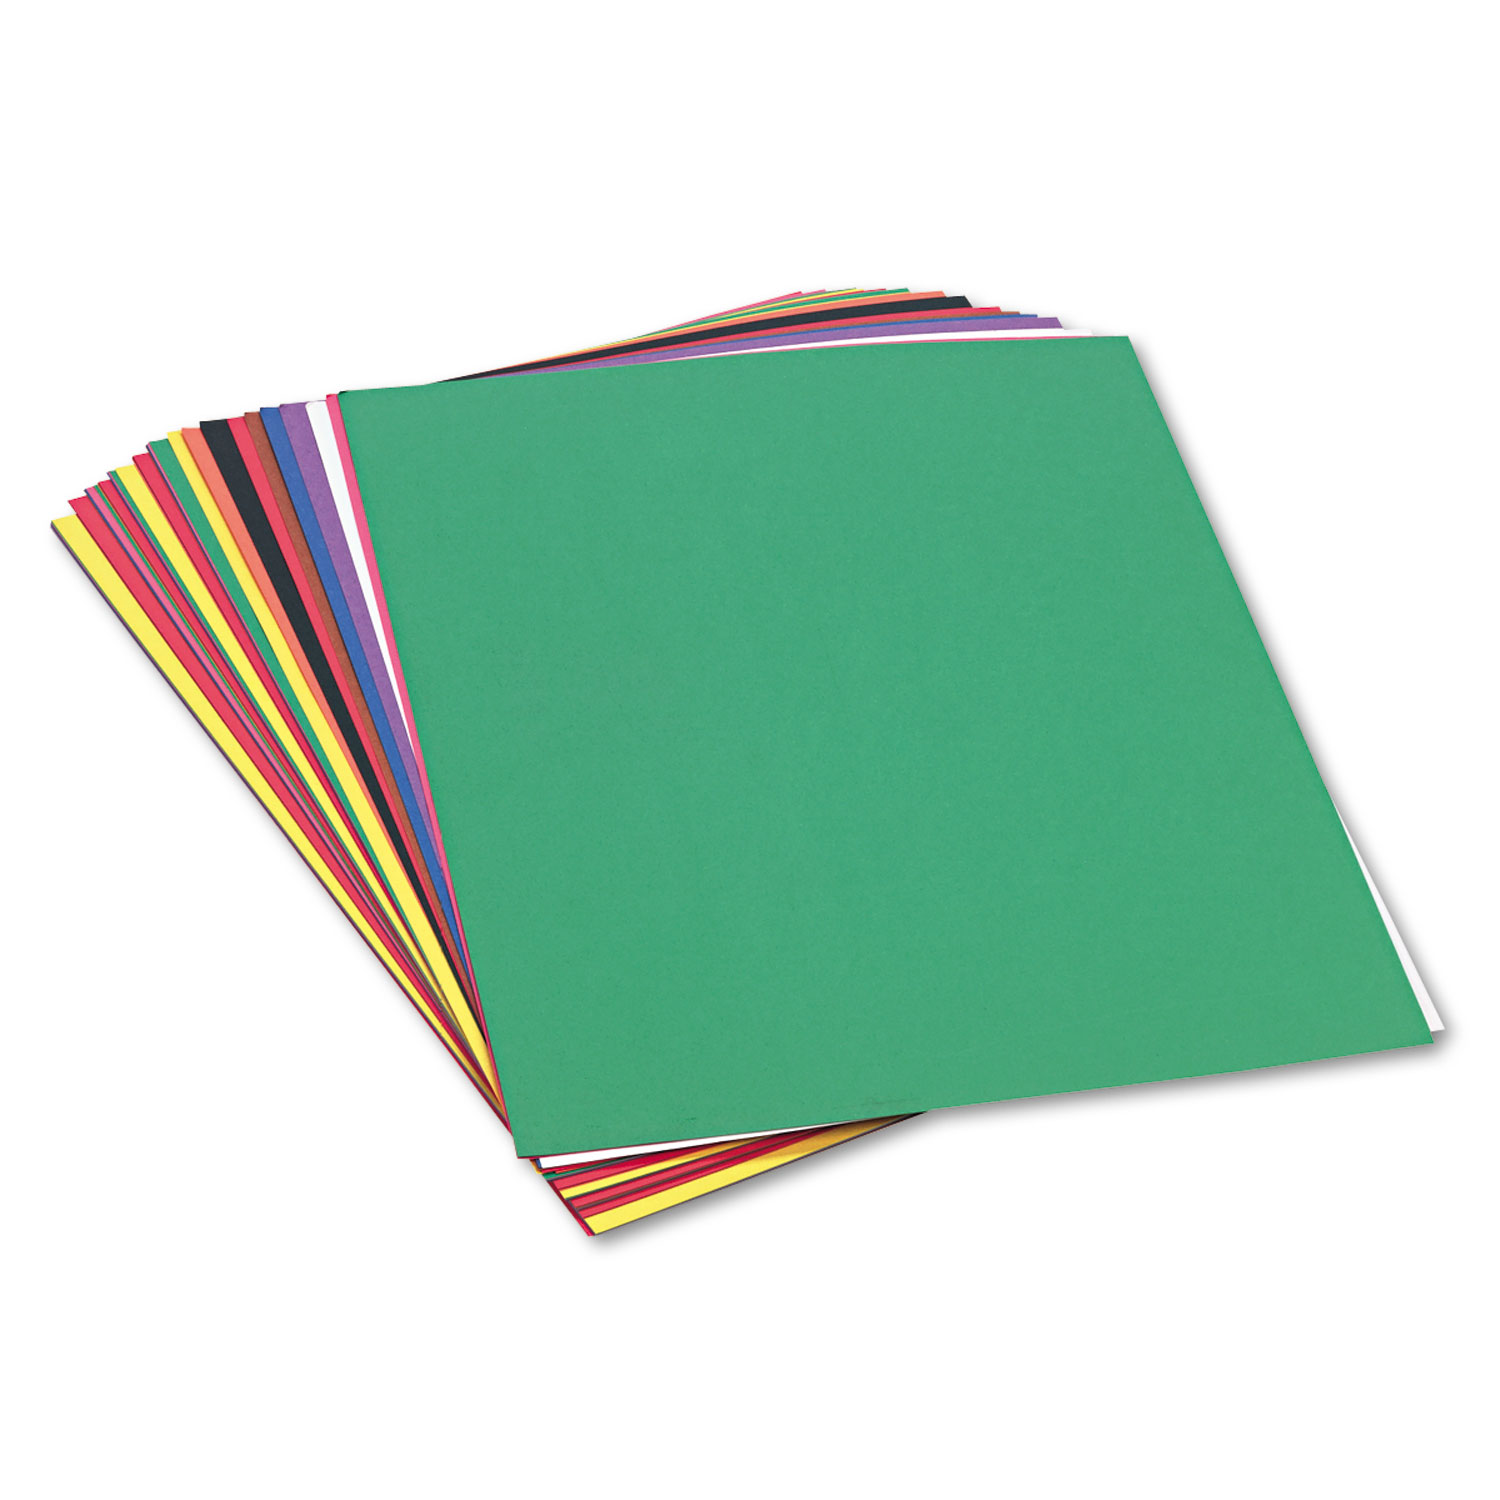  SunWorks 6523 Construction Paper, 58lb, 24 x 36, Assorted, 50/Pack (PAC6523) 